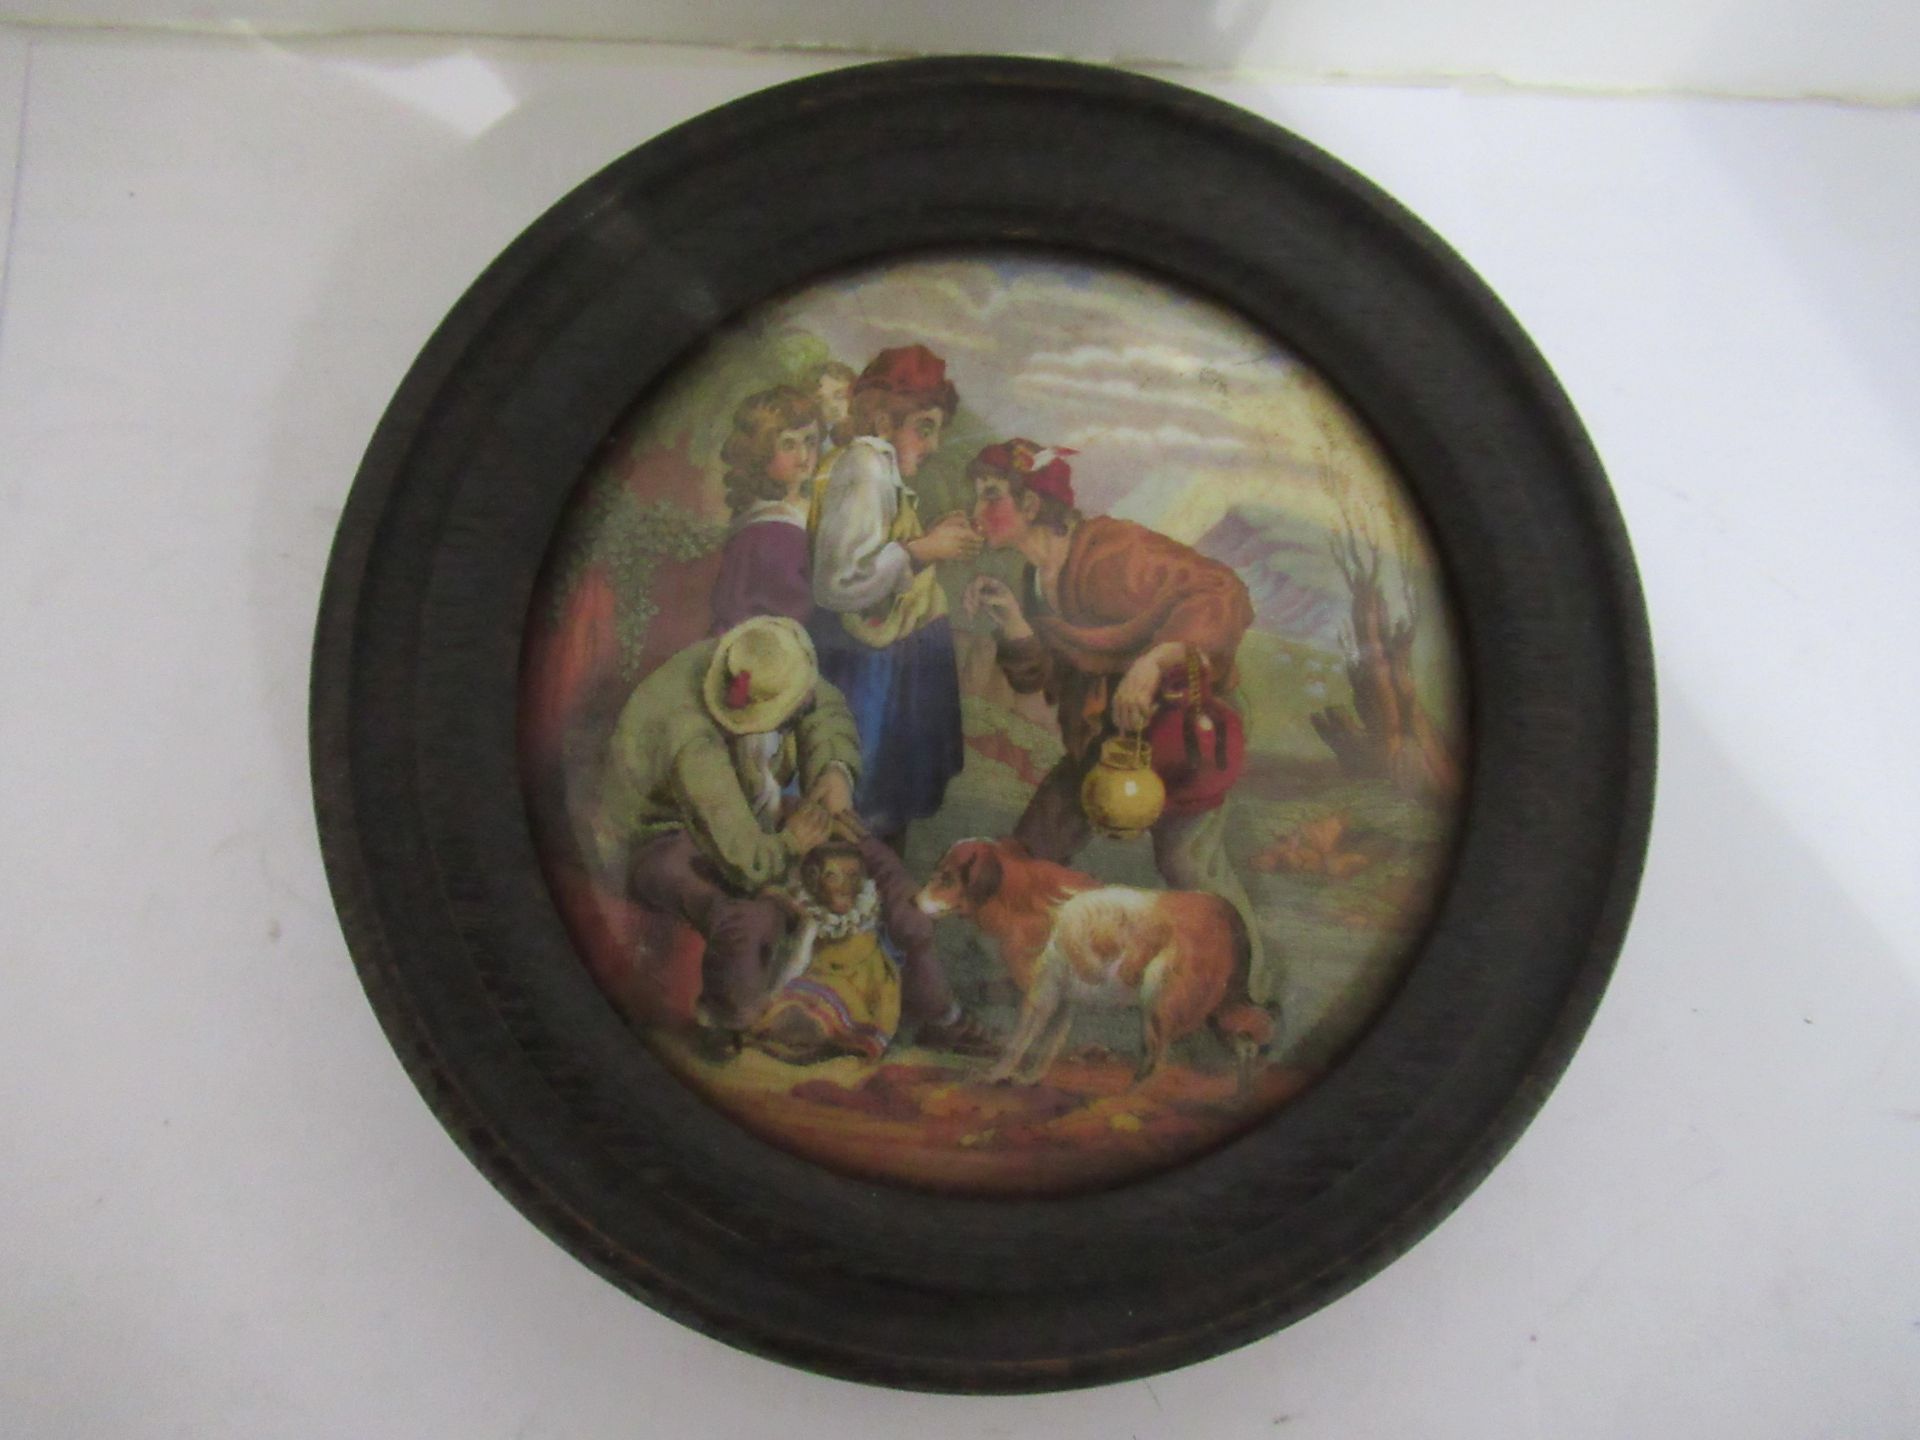 6x Prattware ceramic lids in wooden mounts including 'P.Wouvermann Pinx', 'Lend a Bite', 'Fording Th - Image 2 of 12